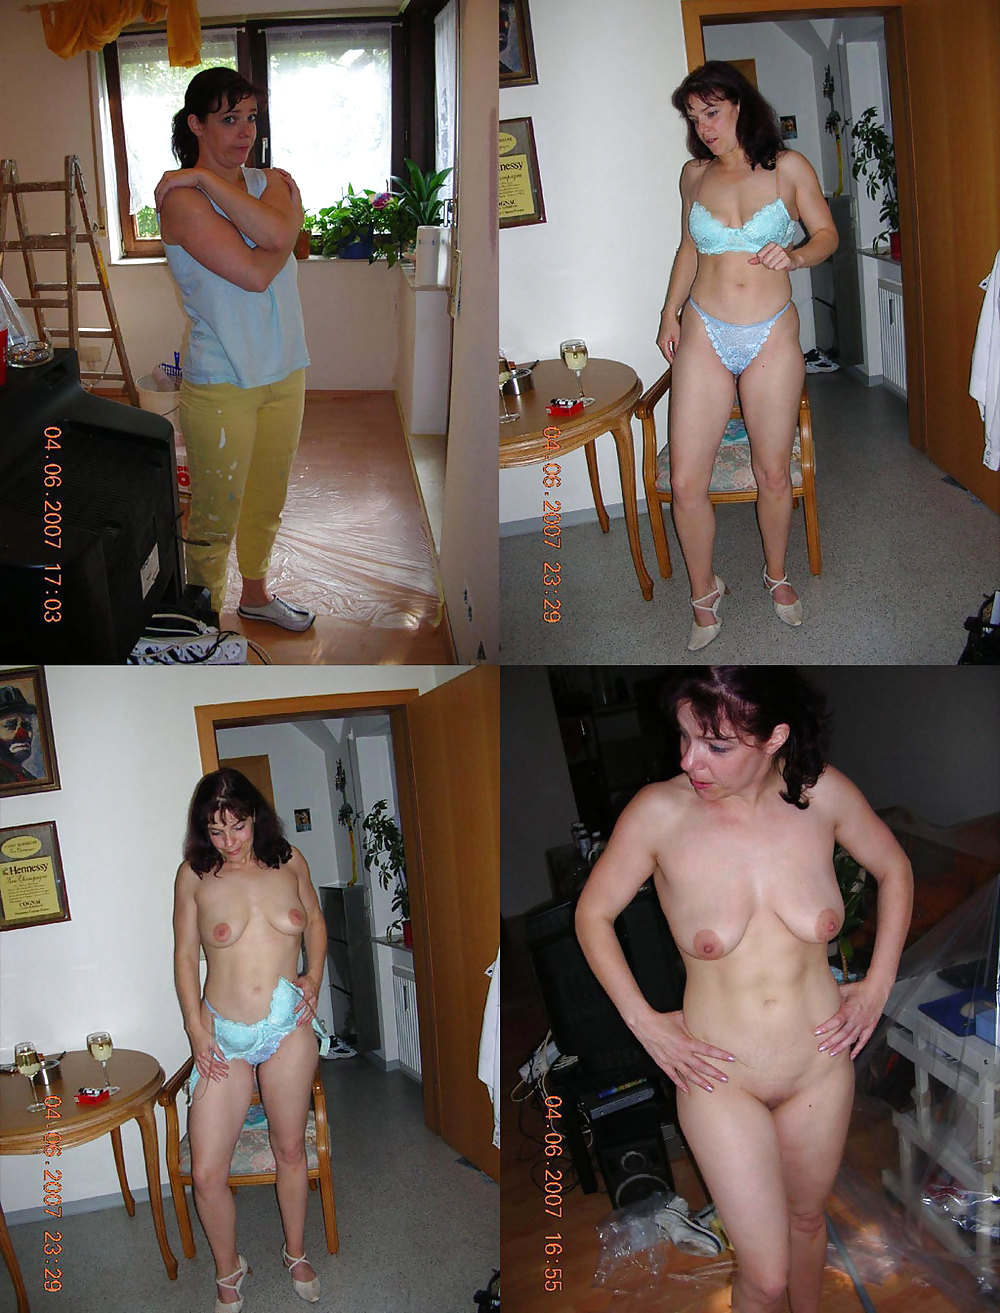 Some hot MILF,BaBe&Mature DReSSeD UNdresseD Amateur Mixed  #21544683